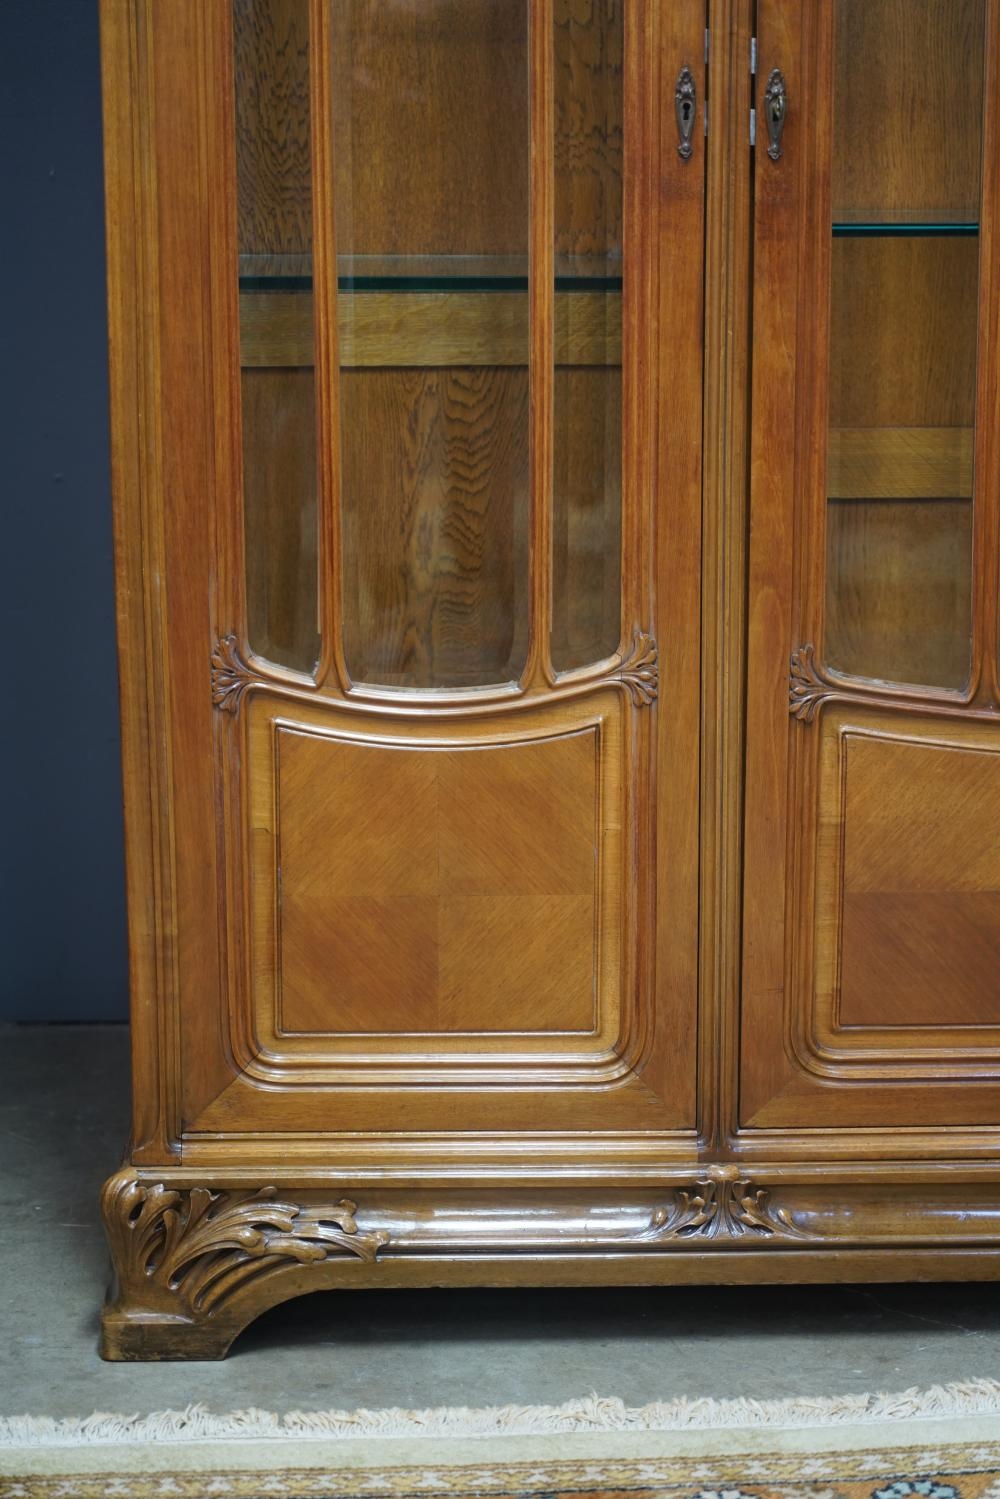 Artwork by Louis Majorelle, : Cabinet, Made of metal and colored